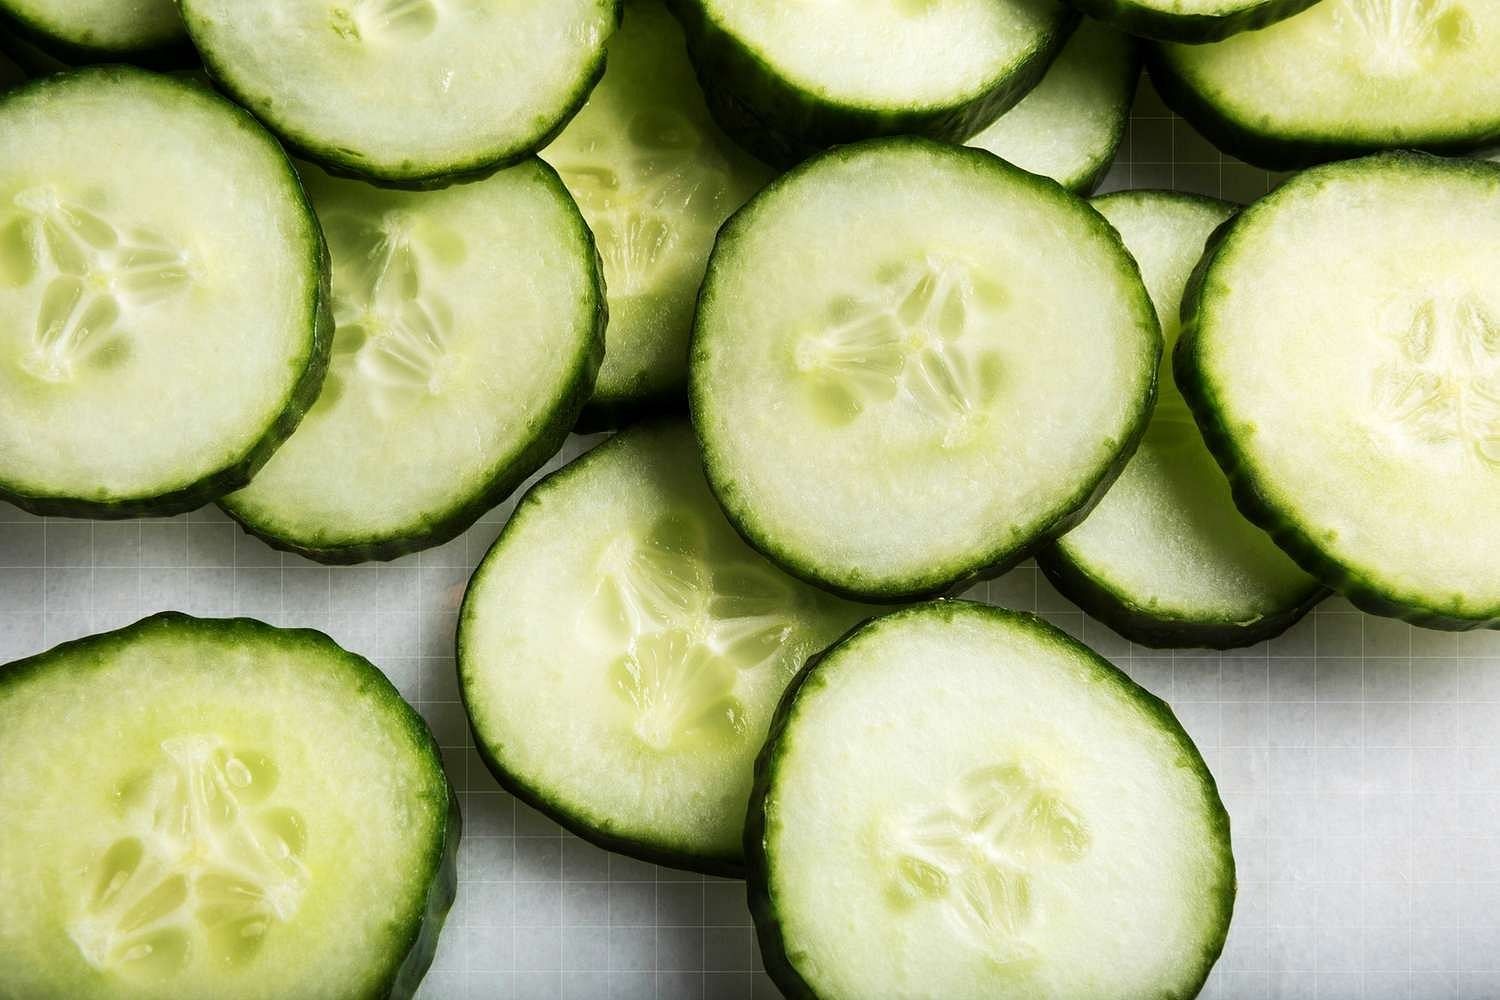 Eating cucumber at night (Image via Getty Images)